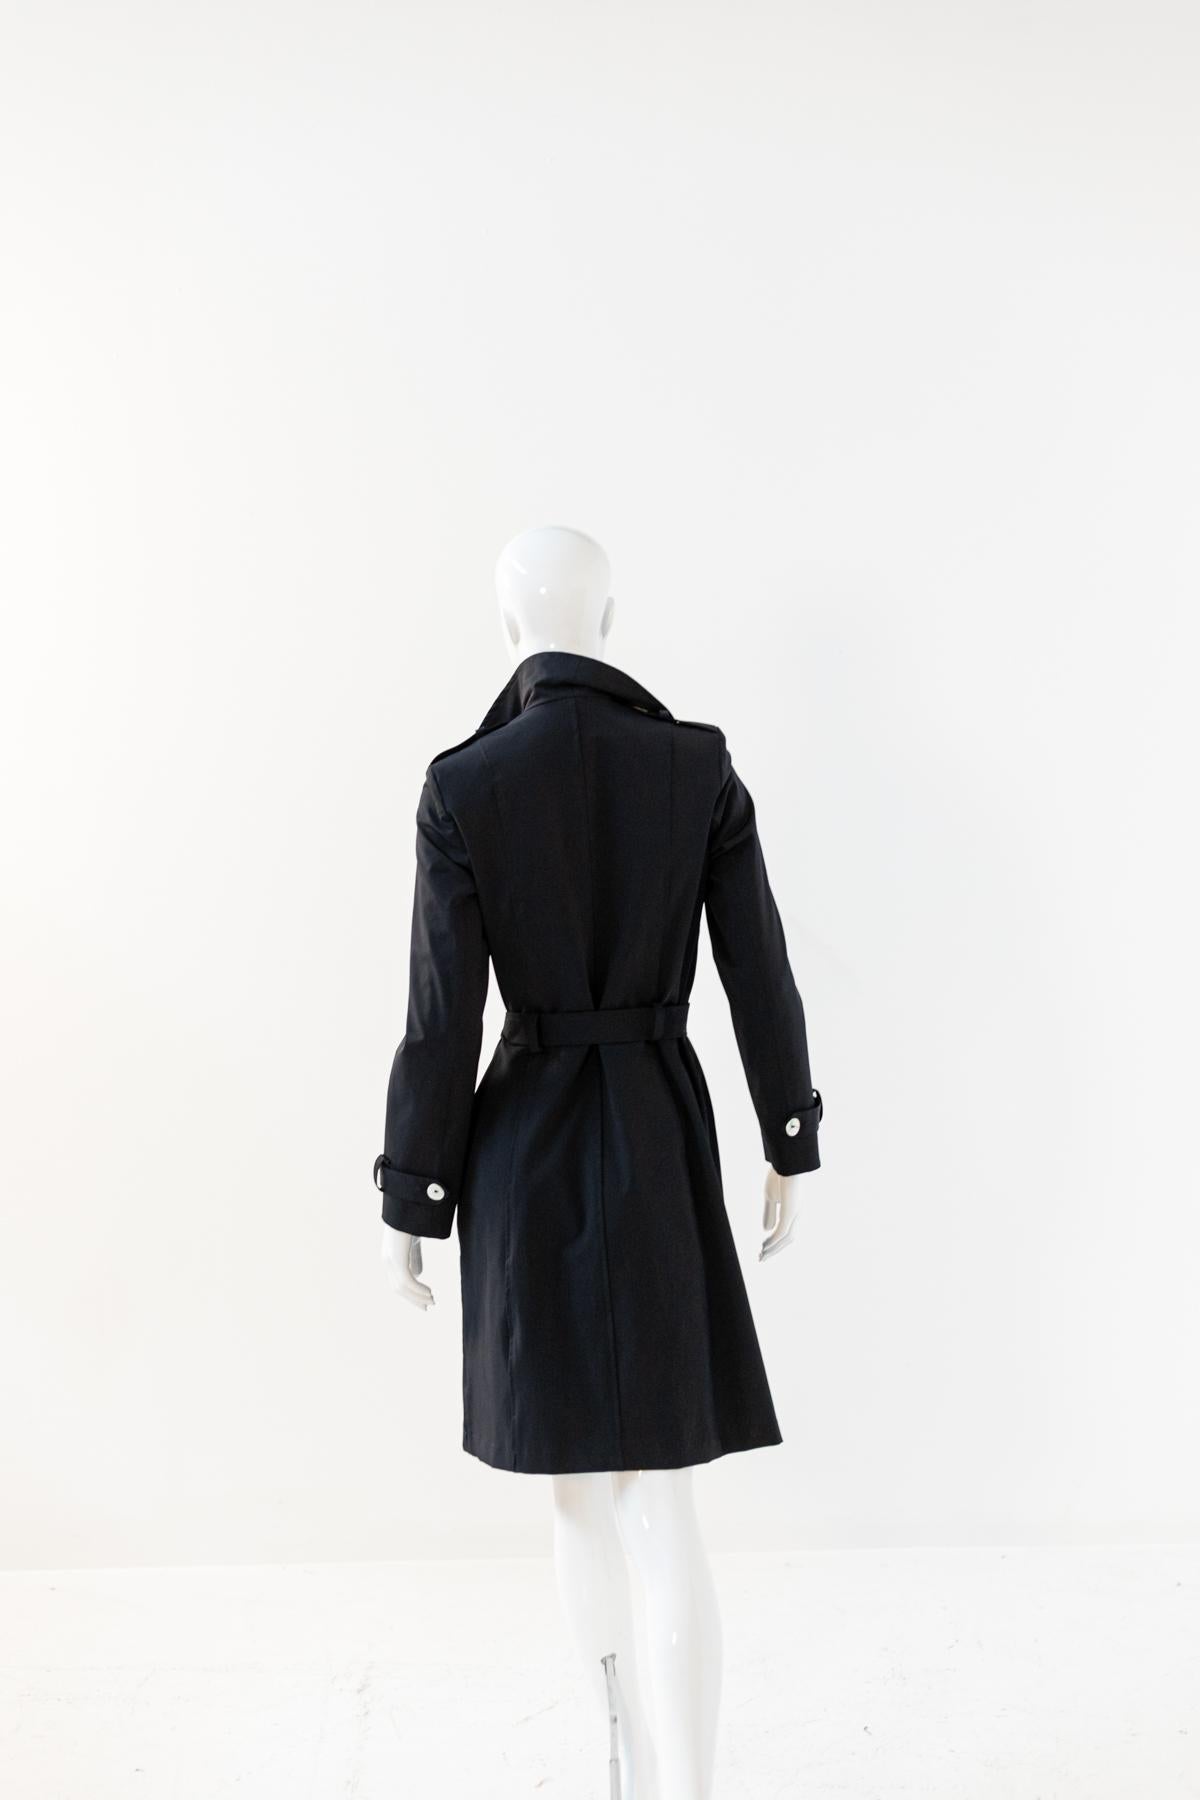 Emilia Andrich Glamorous Black Trench Coat with Belt For Sale 6